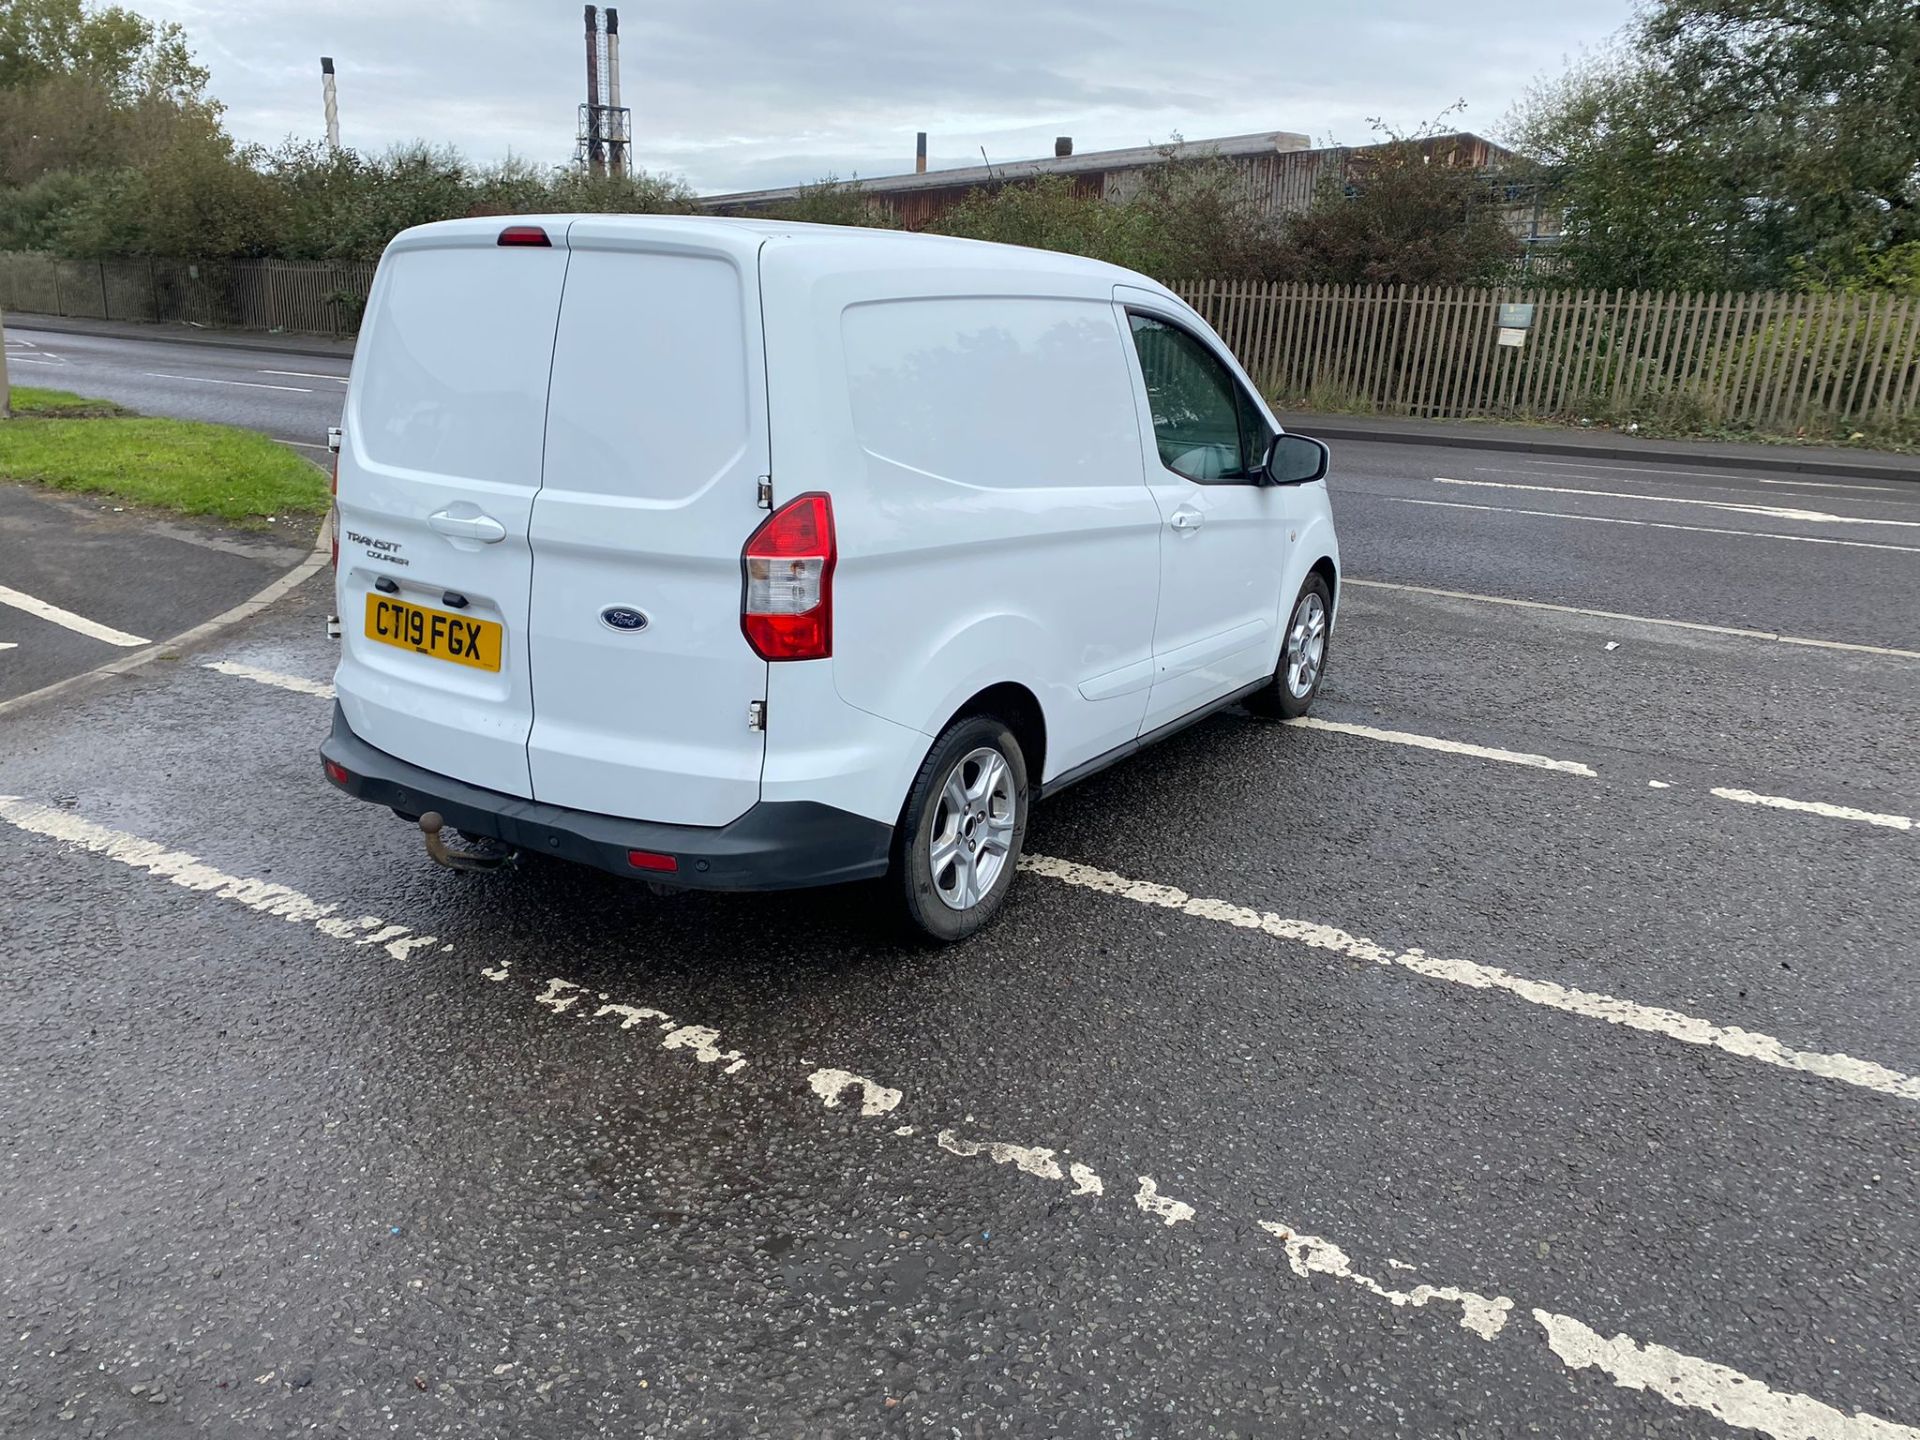 2019 19 FORD TRANSIT COURIER LIMITED PANEL VAN - ALLOY WHEELS - AIR CON - EURO 6. - Image 7 of 10